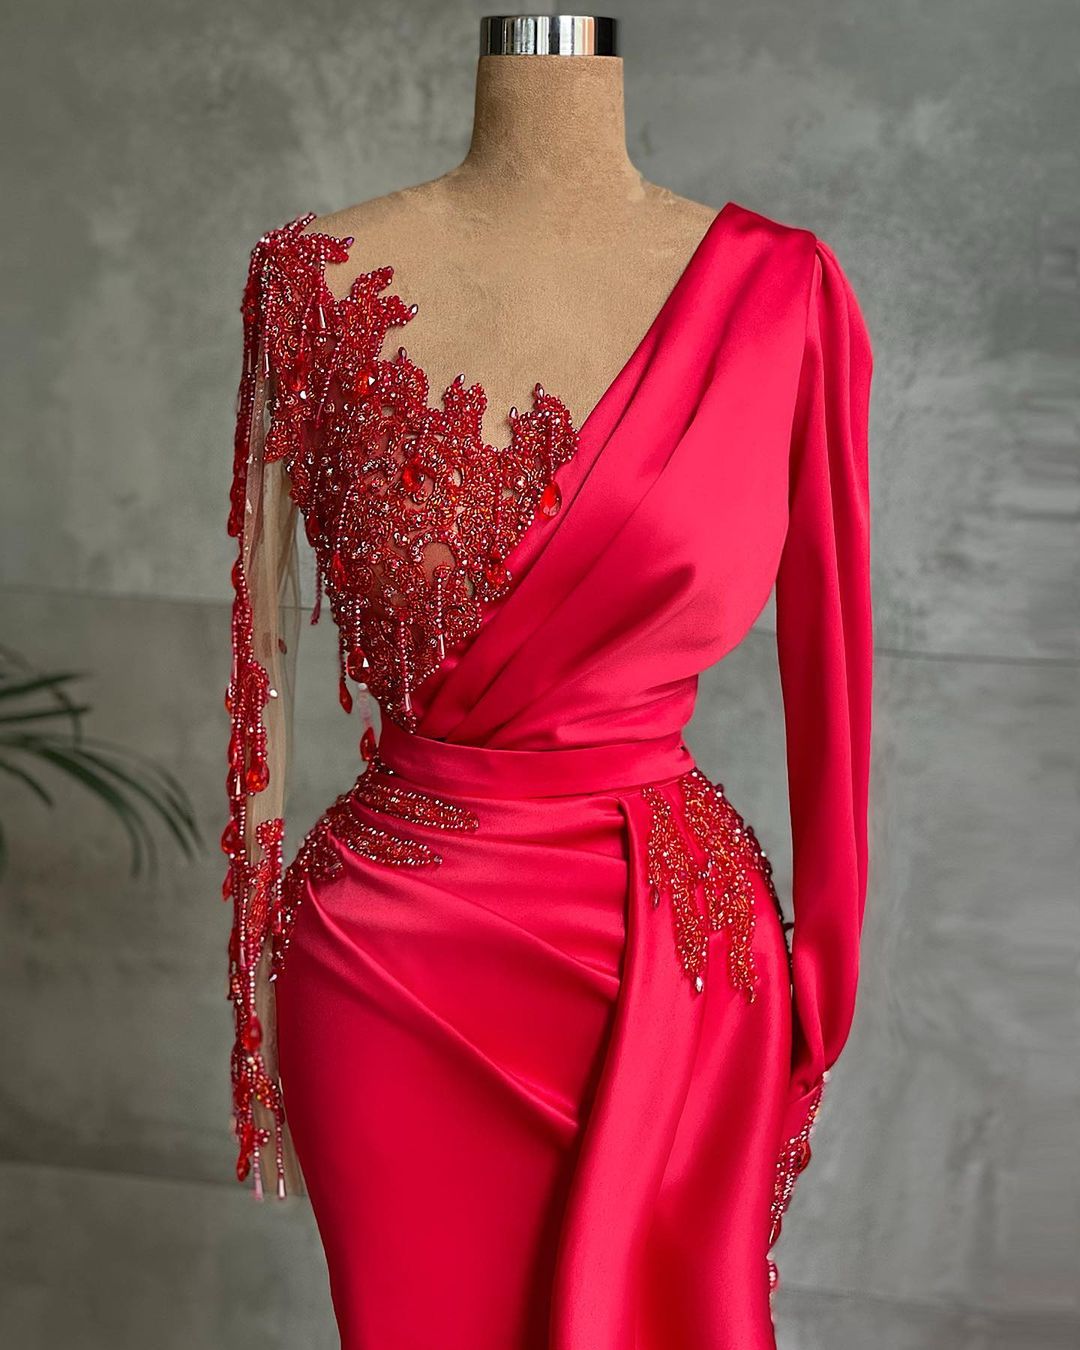 Bridesmaid Dress Mdae To Order, Gorgeous Red Long Sleeve Mermaid Evening Dress Lace Appliques Prom Gown Ruffles